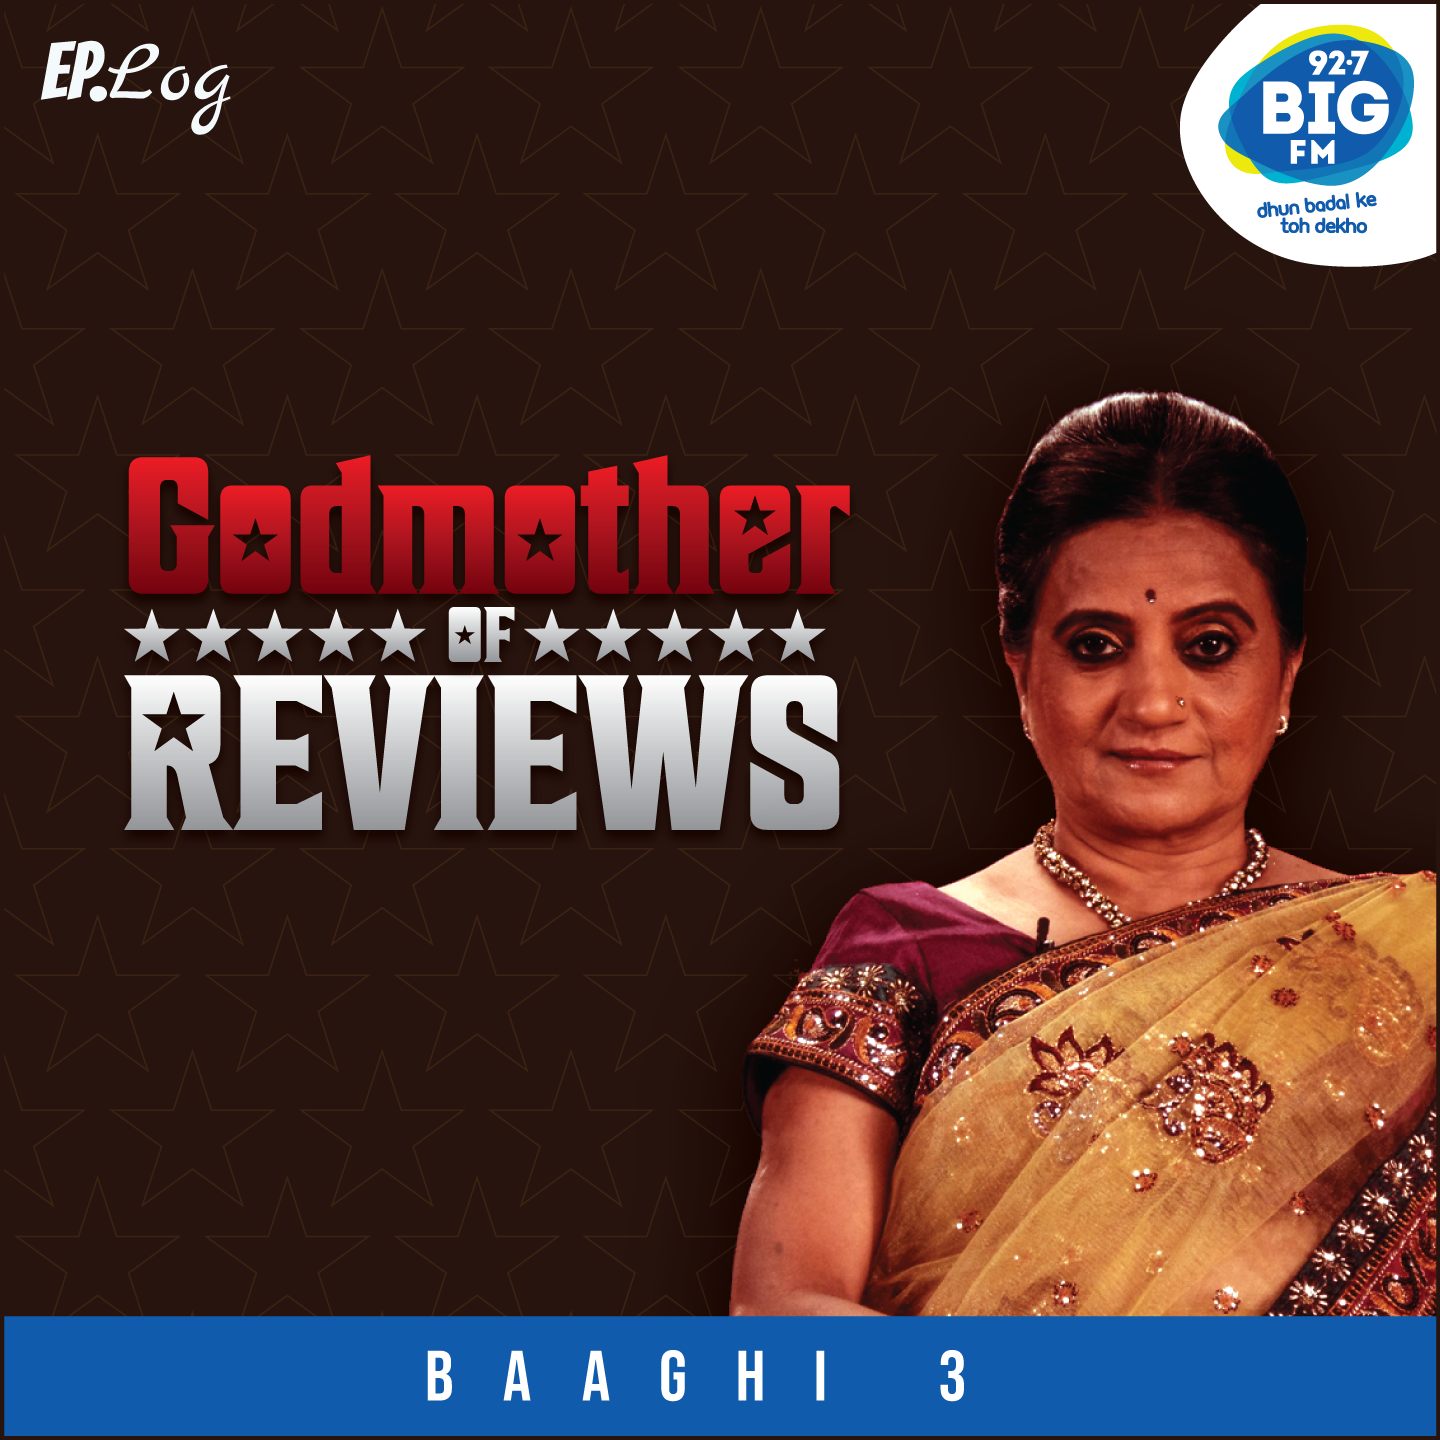 Godmother Of Reviews – BAAGHI 3